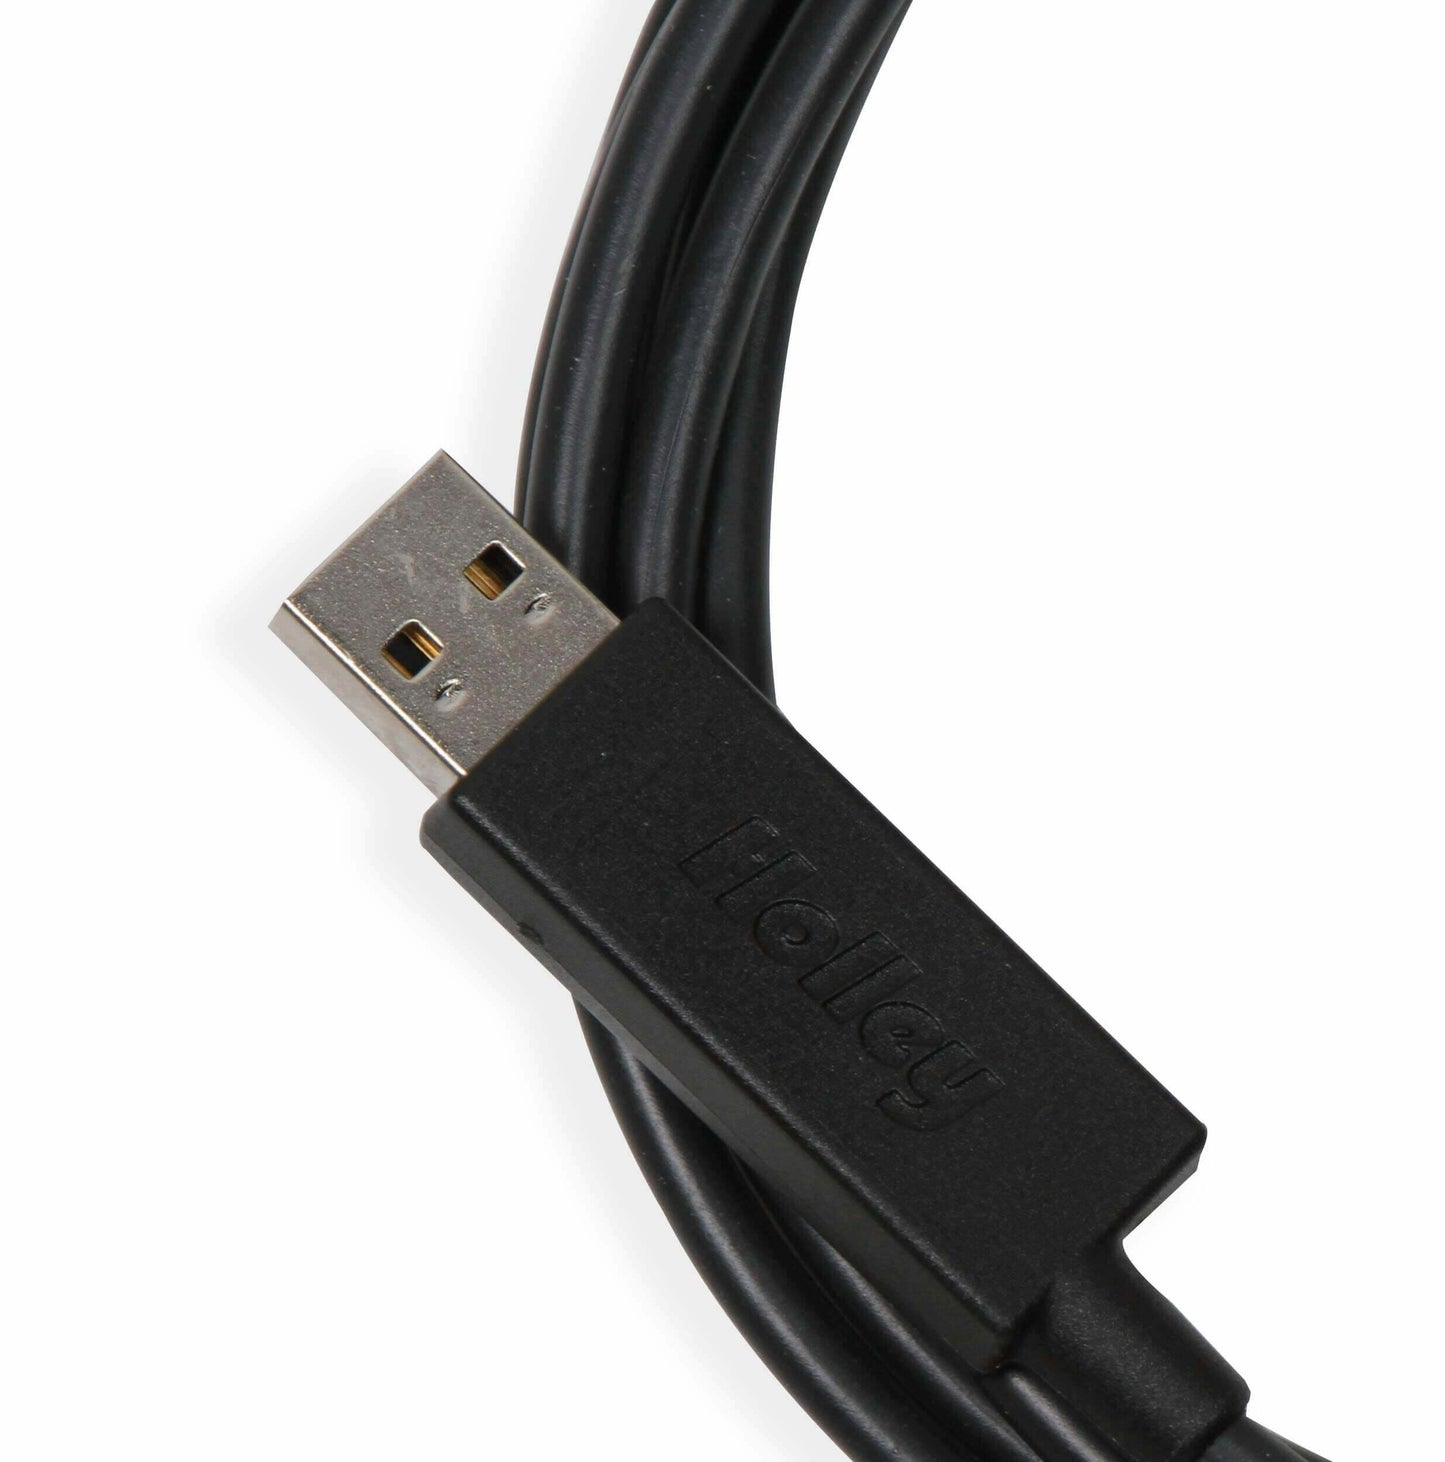 Holley EFI System USB Cables 558-443